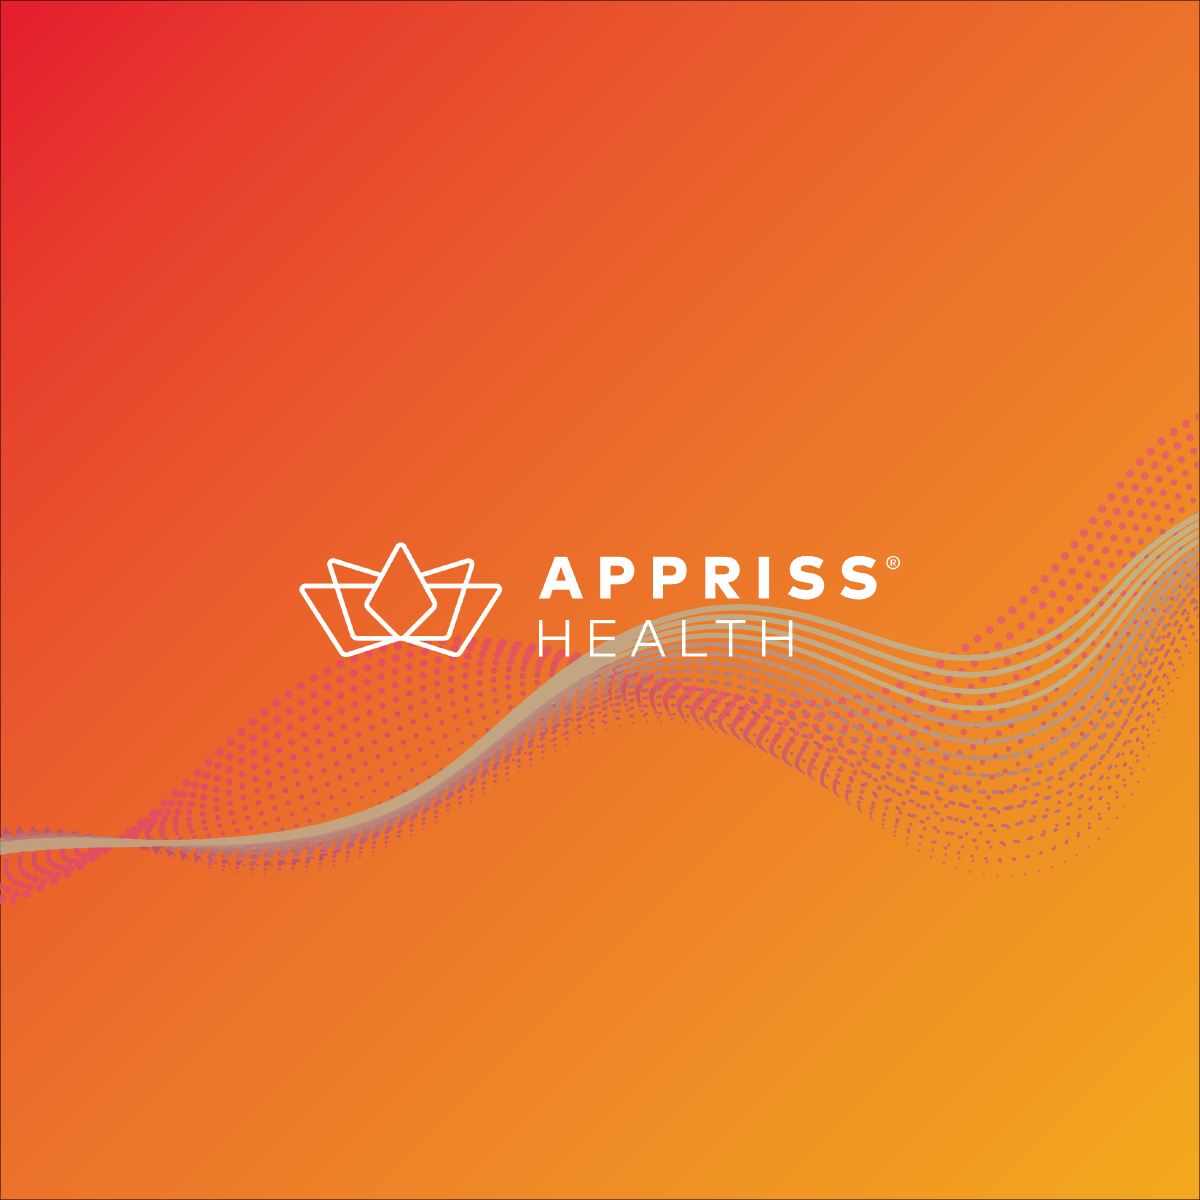 Appriss Logo - Identify, prevent and manage substance use disorders